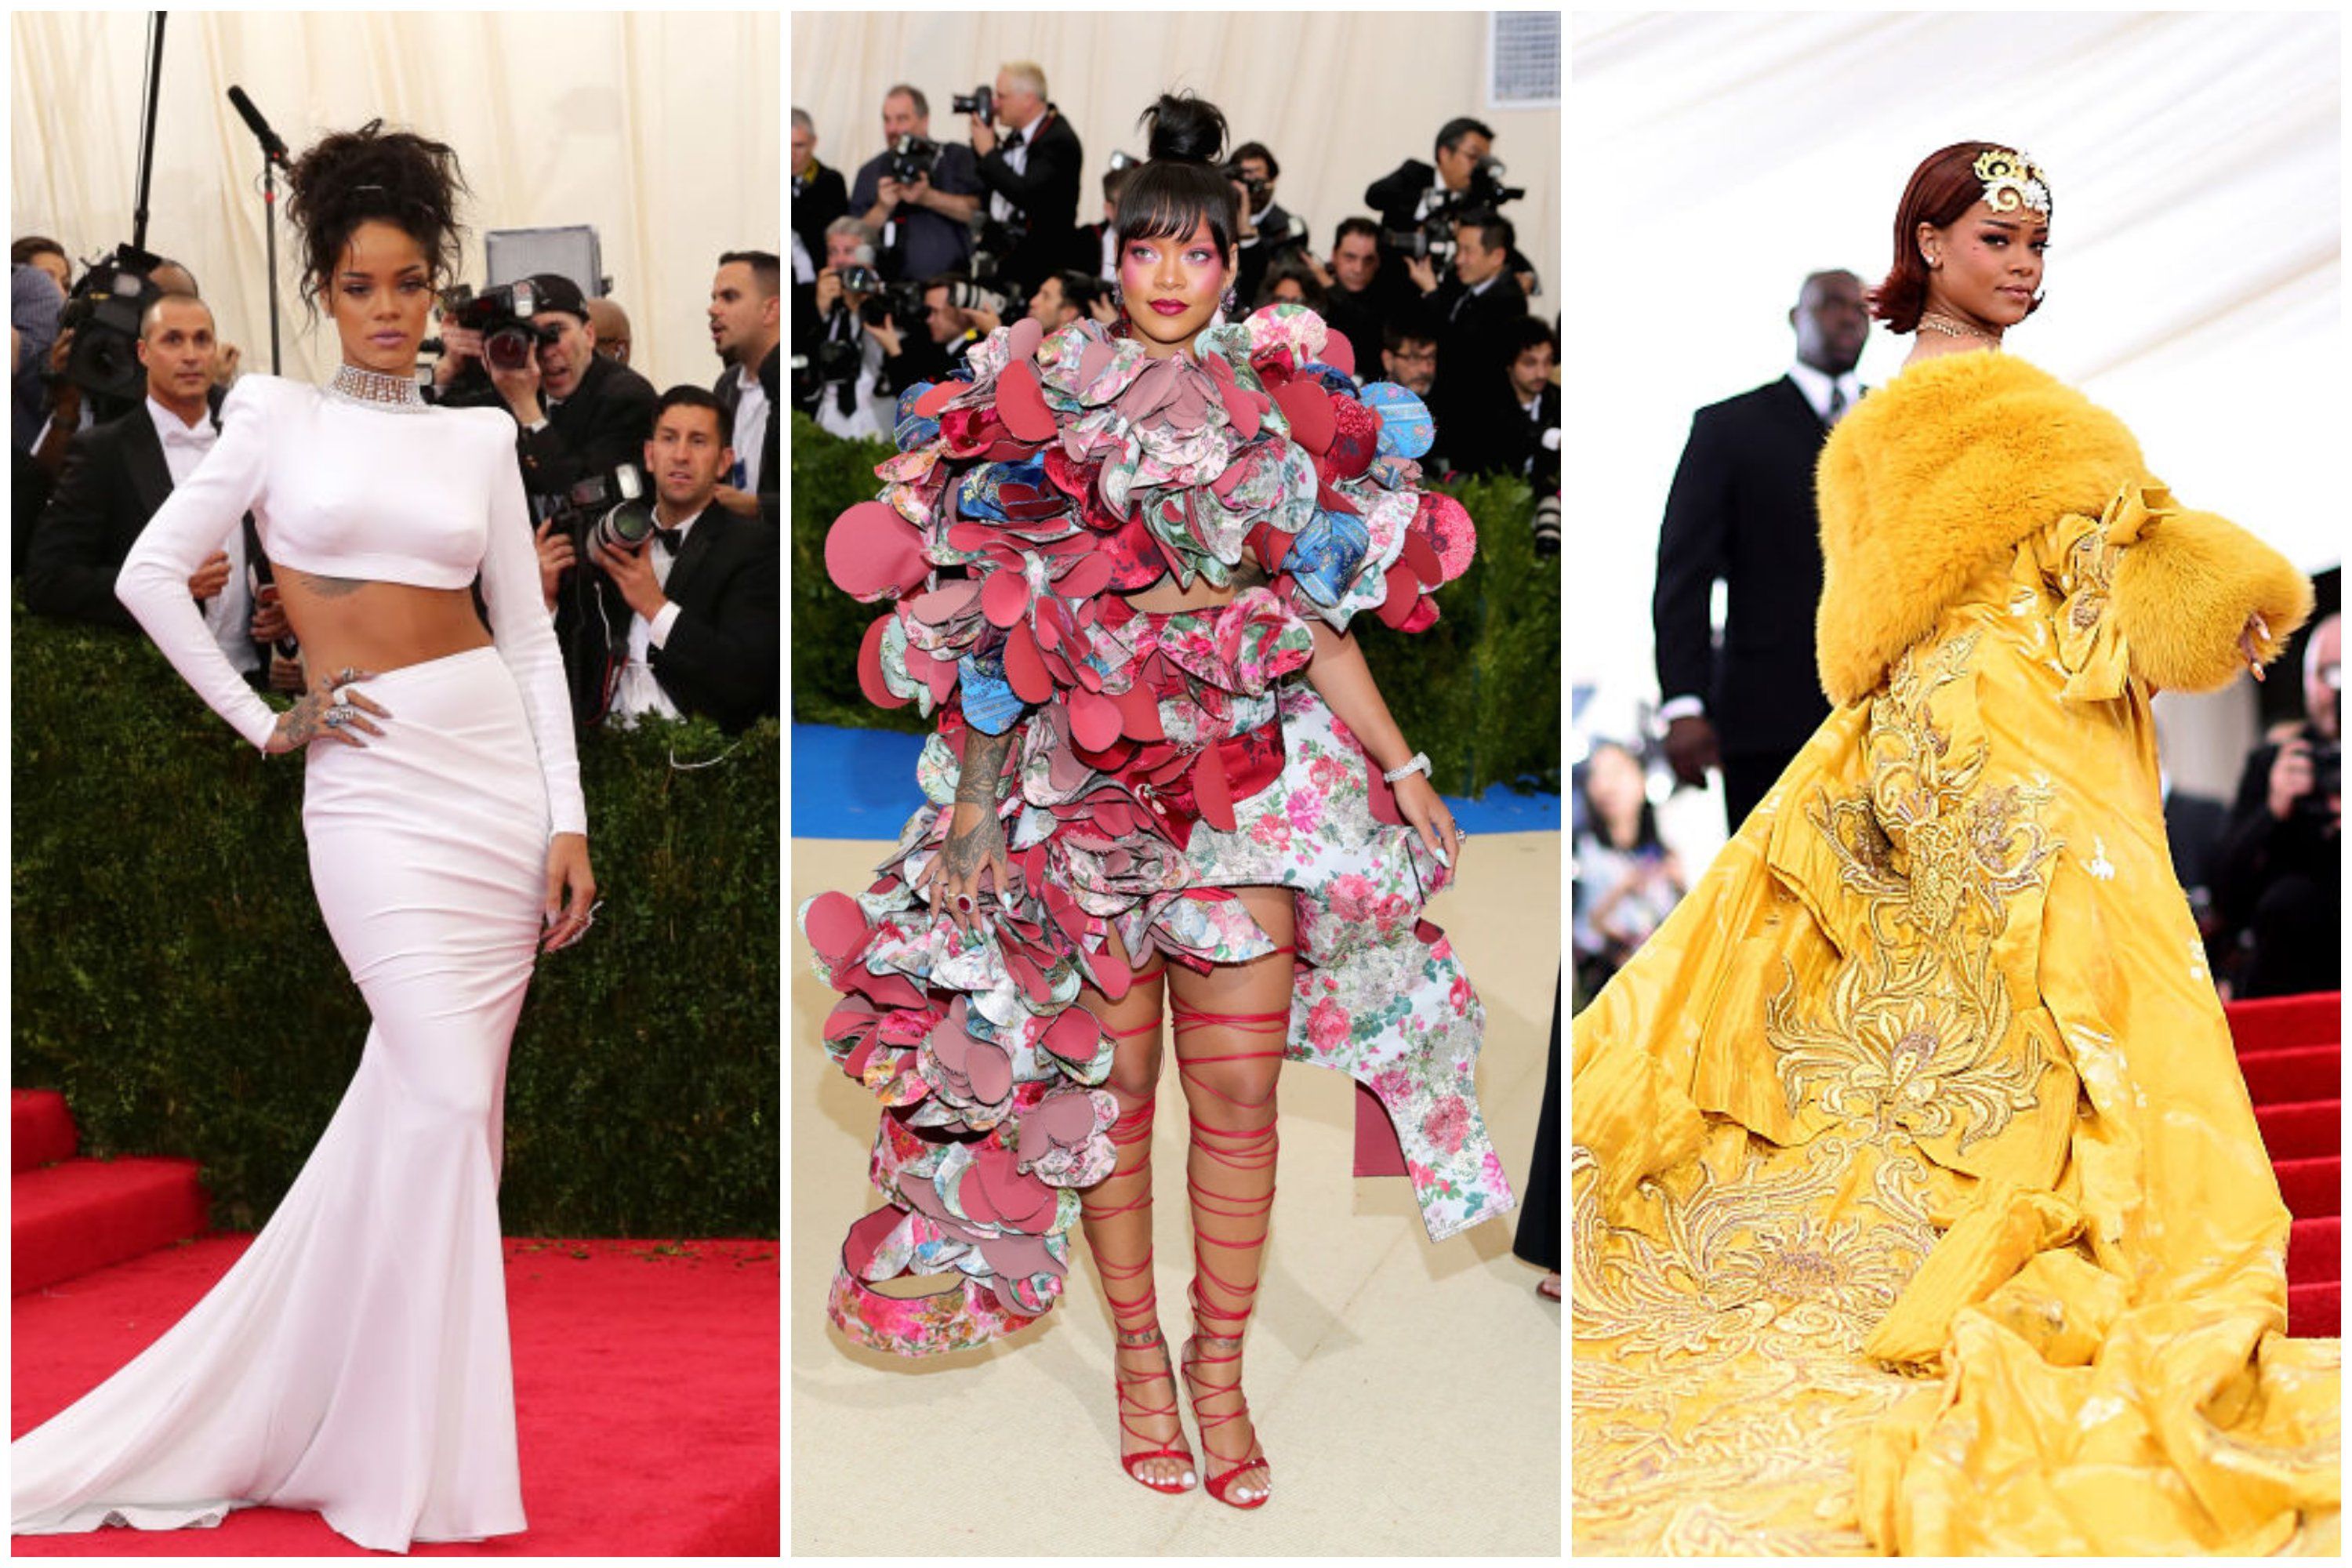 fans devastated after pics of rihanna ‘at the met gala’ turn out to be fake